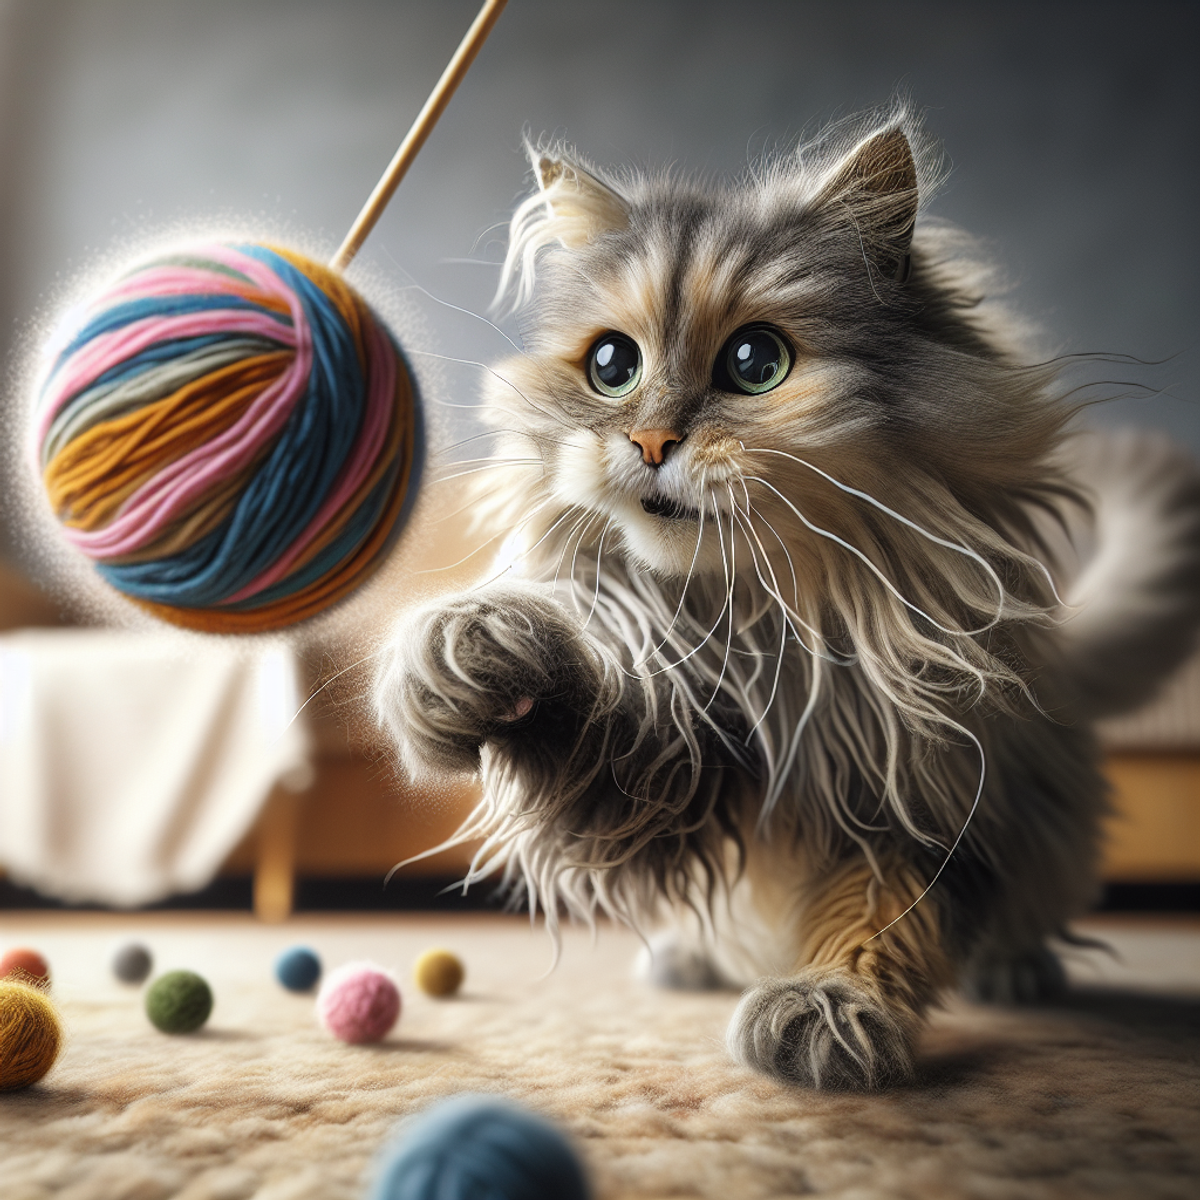 Elderly cat playing with a yarn ball filled with catnip.